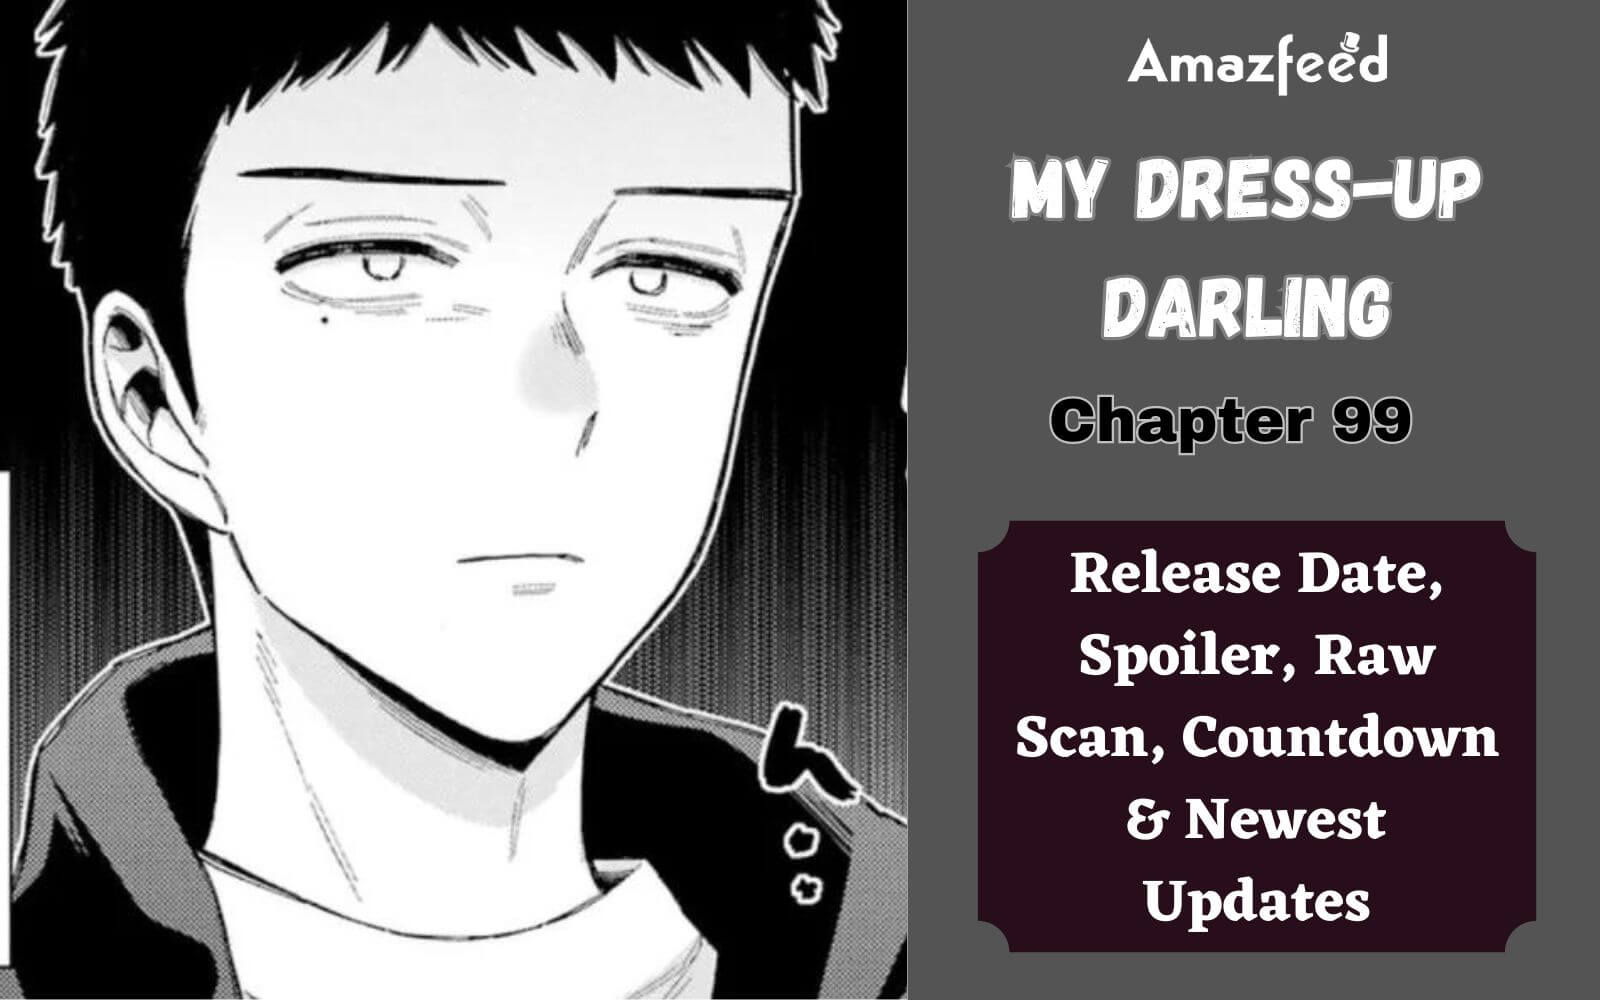 My Dress-Up Darling Chapter 99: Final release date, where to read